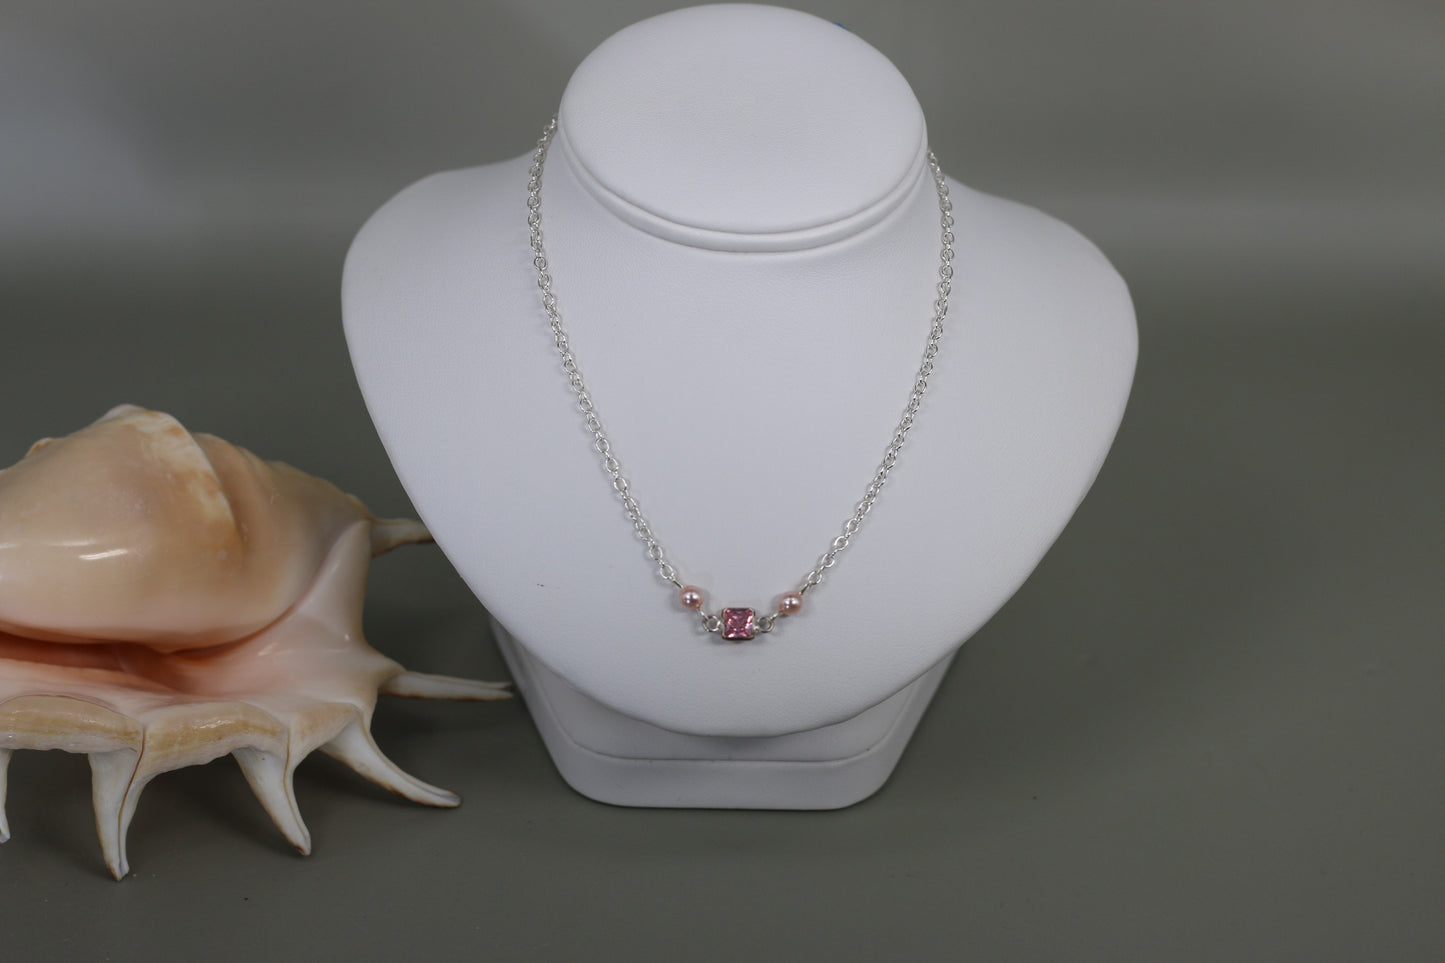 Pink CZ Faceted Square Sterling Silver Rosaline Pink Preciosa Czech Pearls 16" Cable Chain Necklace with Sterling Silver Components - Annabel's Jewelry & Leather